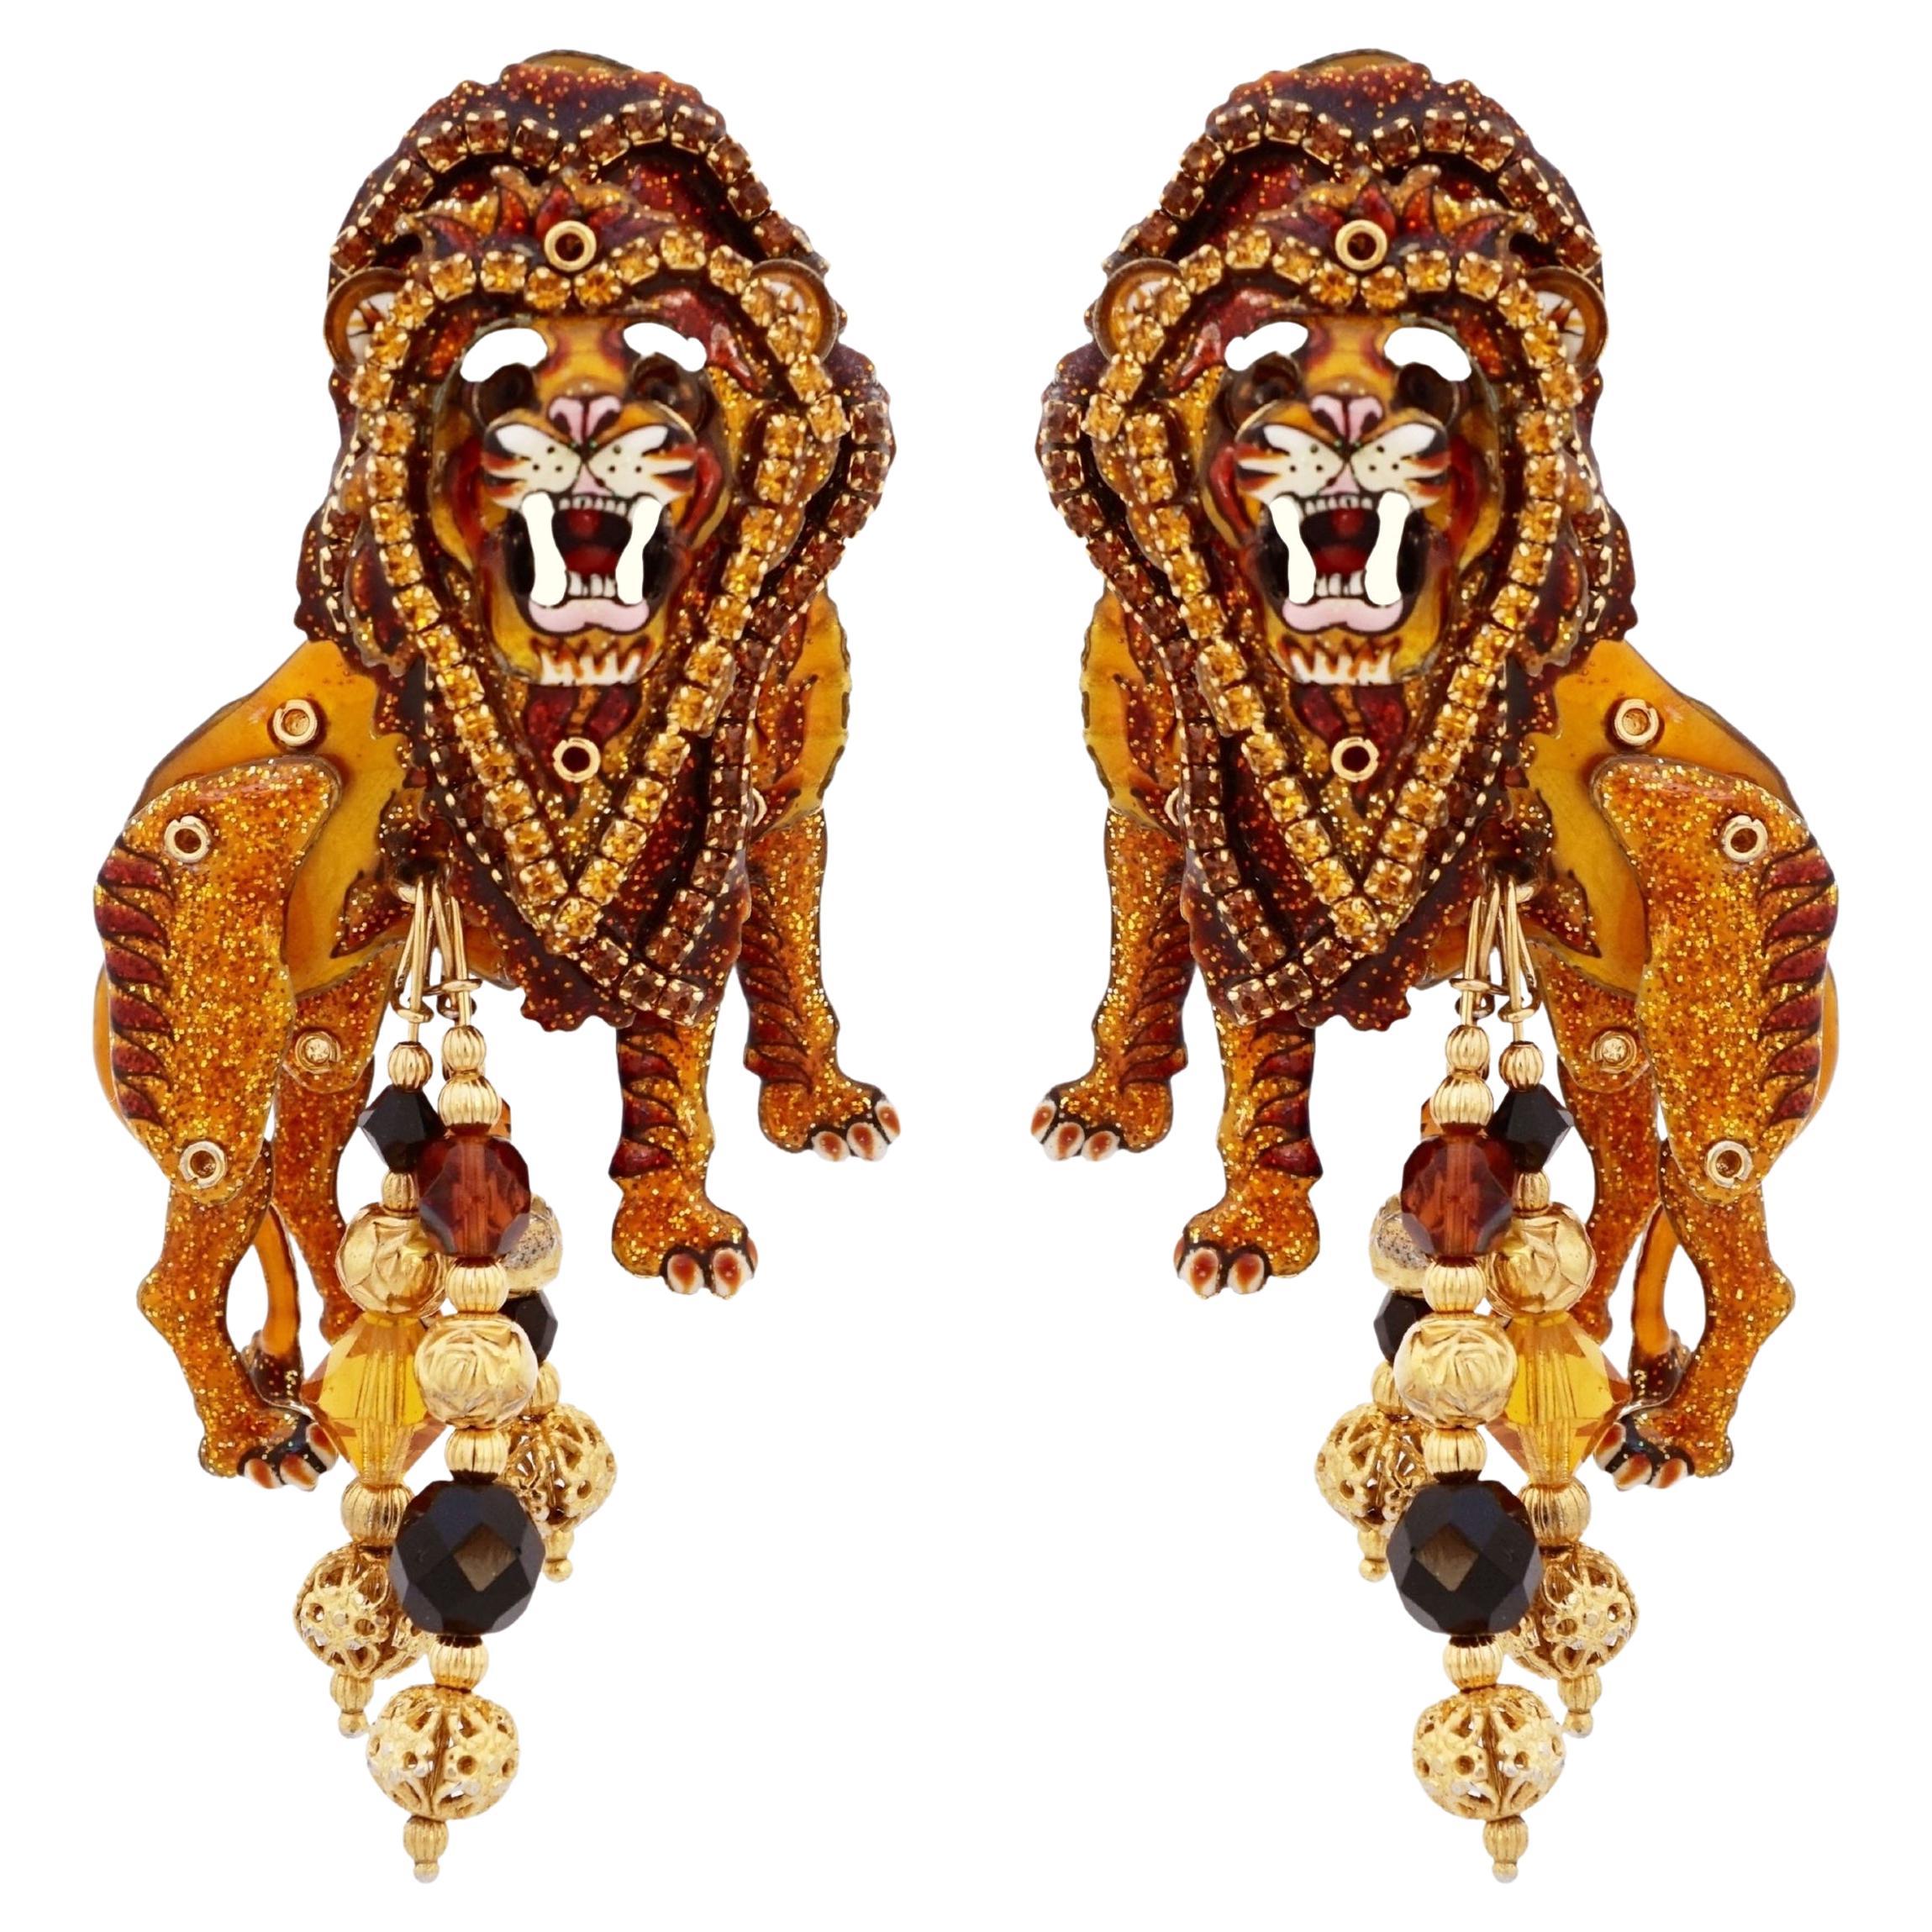 Enamel Marionette "Wild Cats" Lion Statement Earrings By Lunch At The Ritz